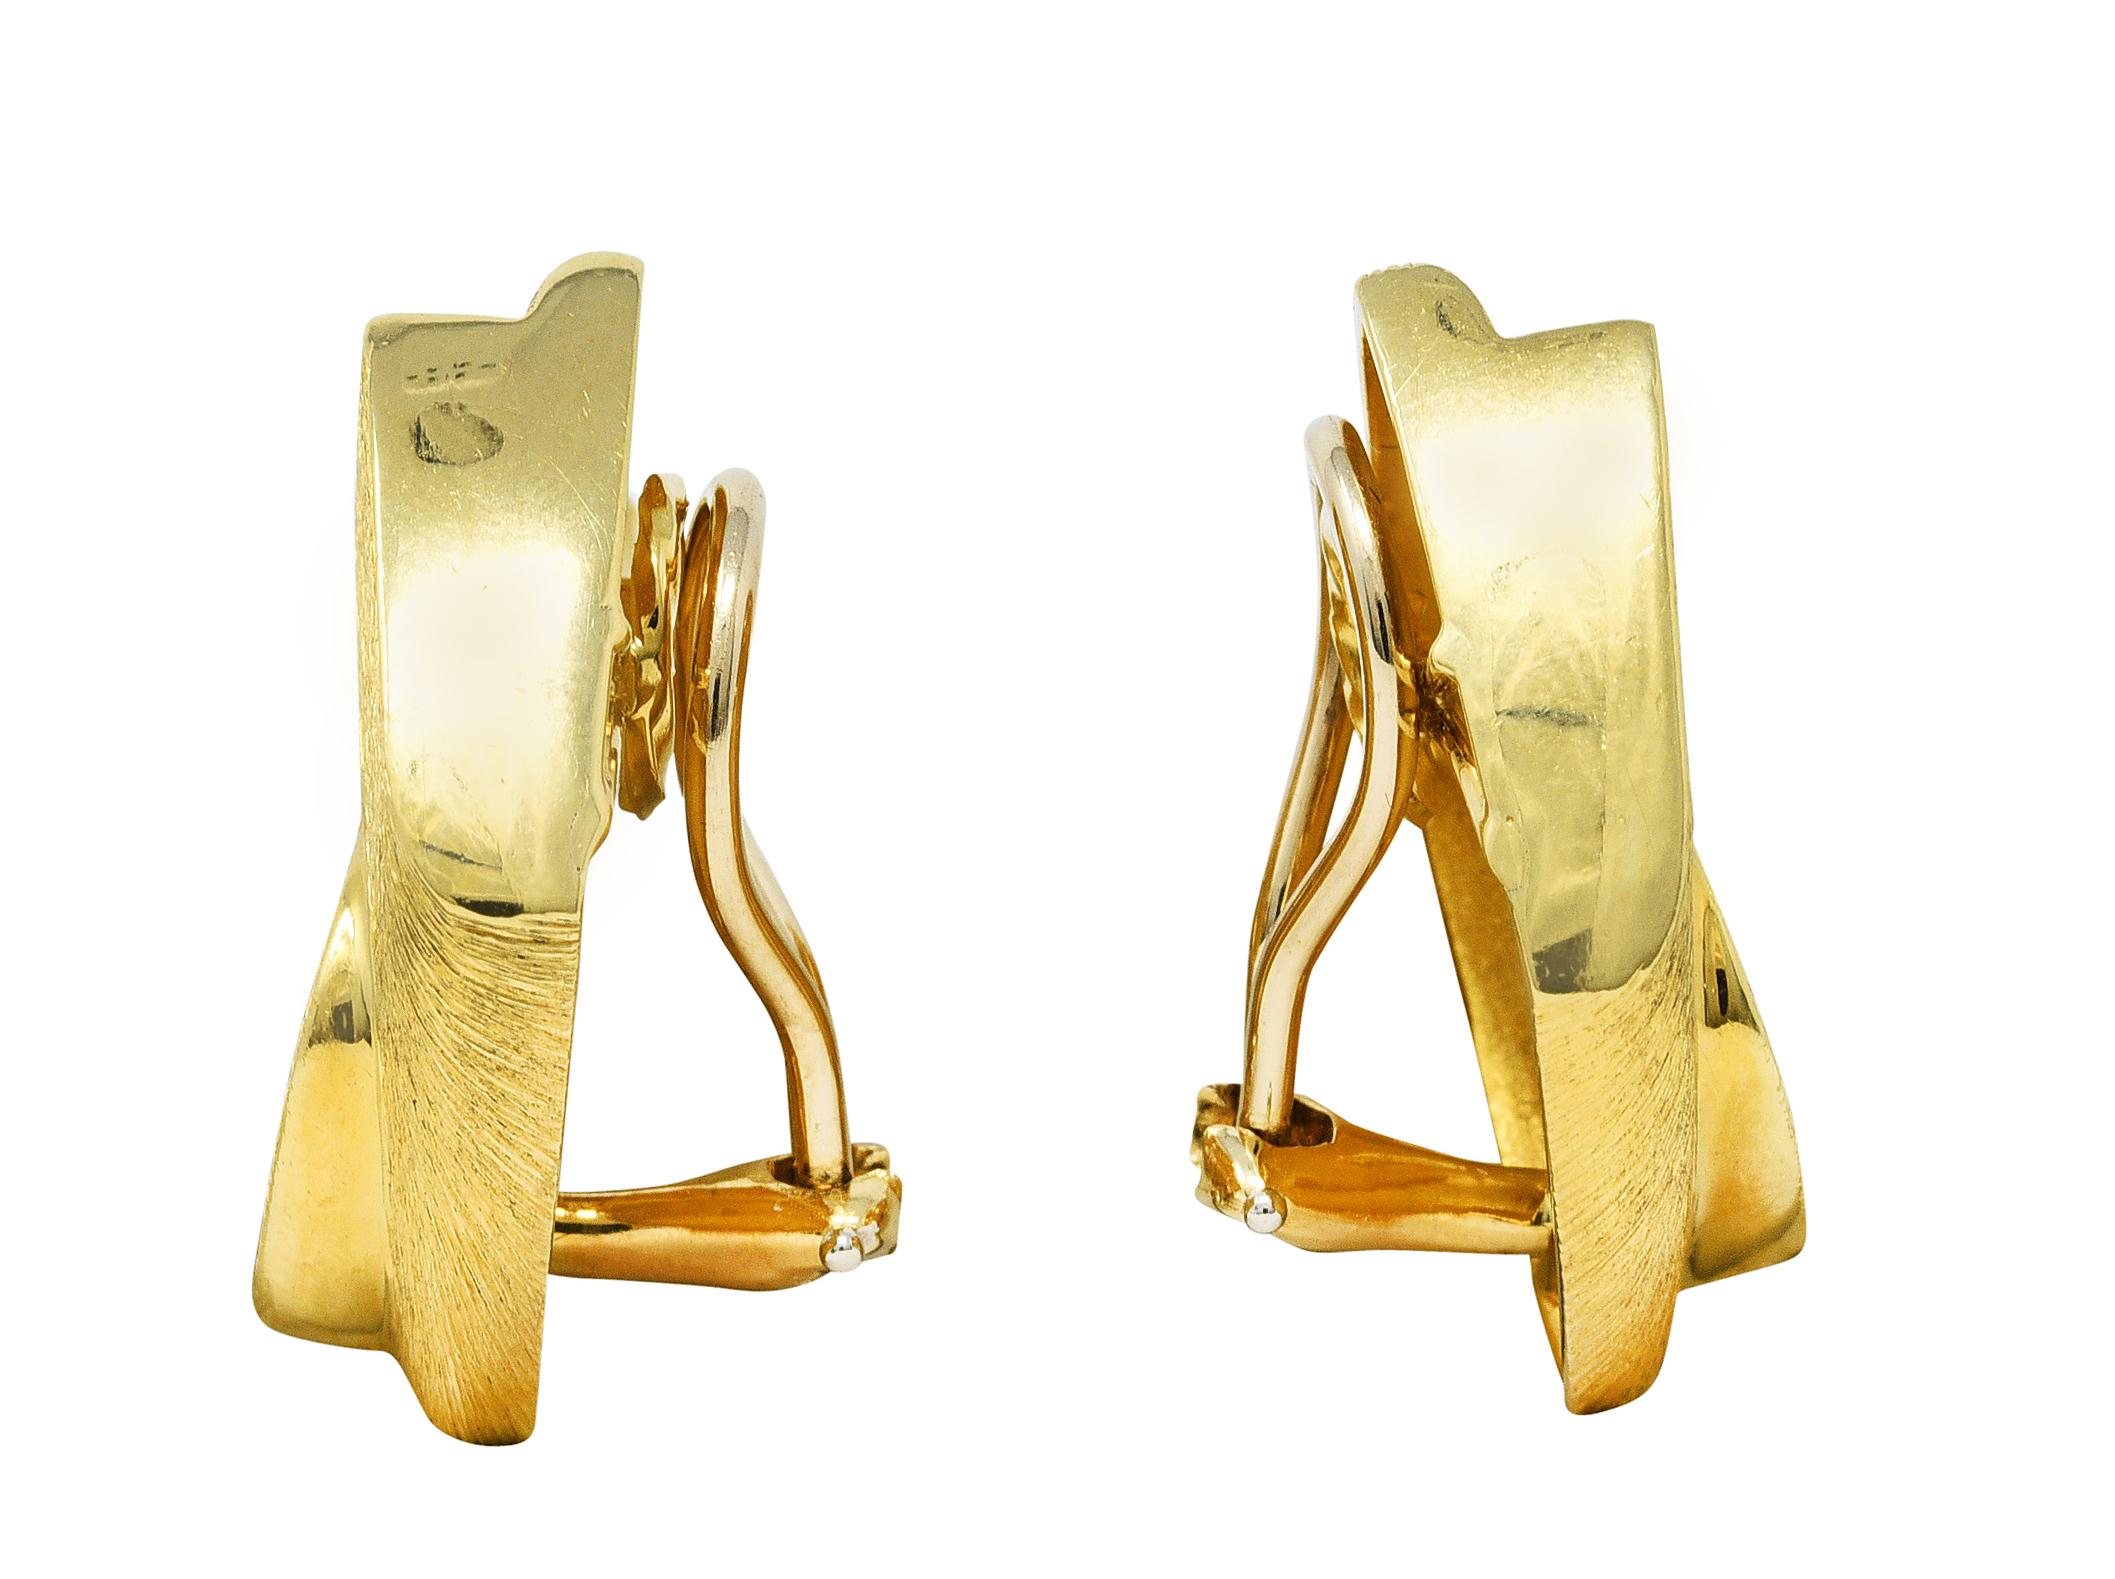 Ear clips are navette shaped with split curved interlocking motif

Accented by deeply brushed gold with high polished edges

Completed by hinged omega backs

Stamped 18k for 18 karat gold 

Numbered and signed for Henry Dunay

From the vintage Sabi